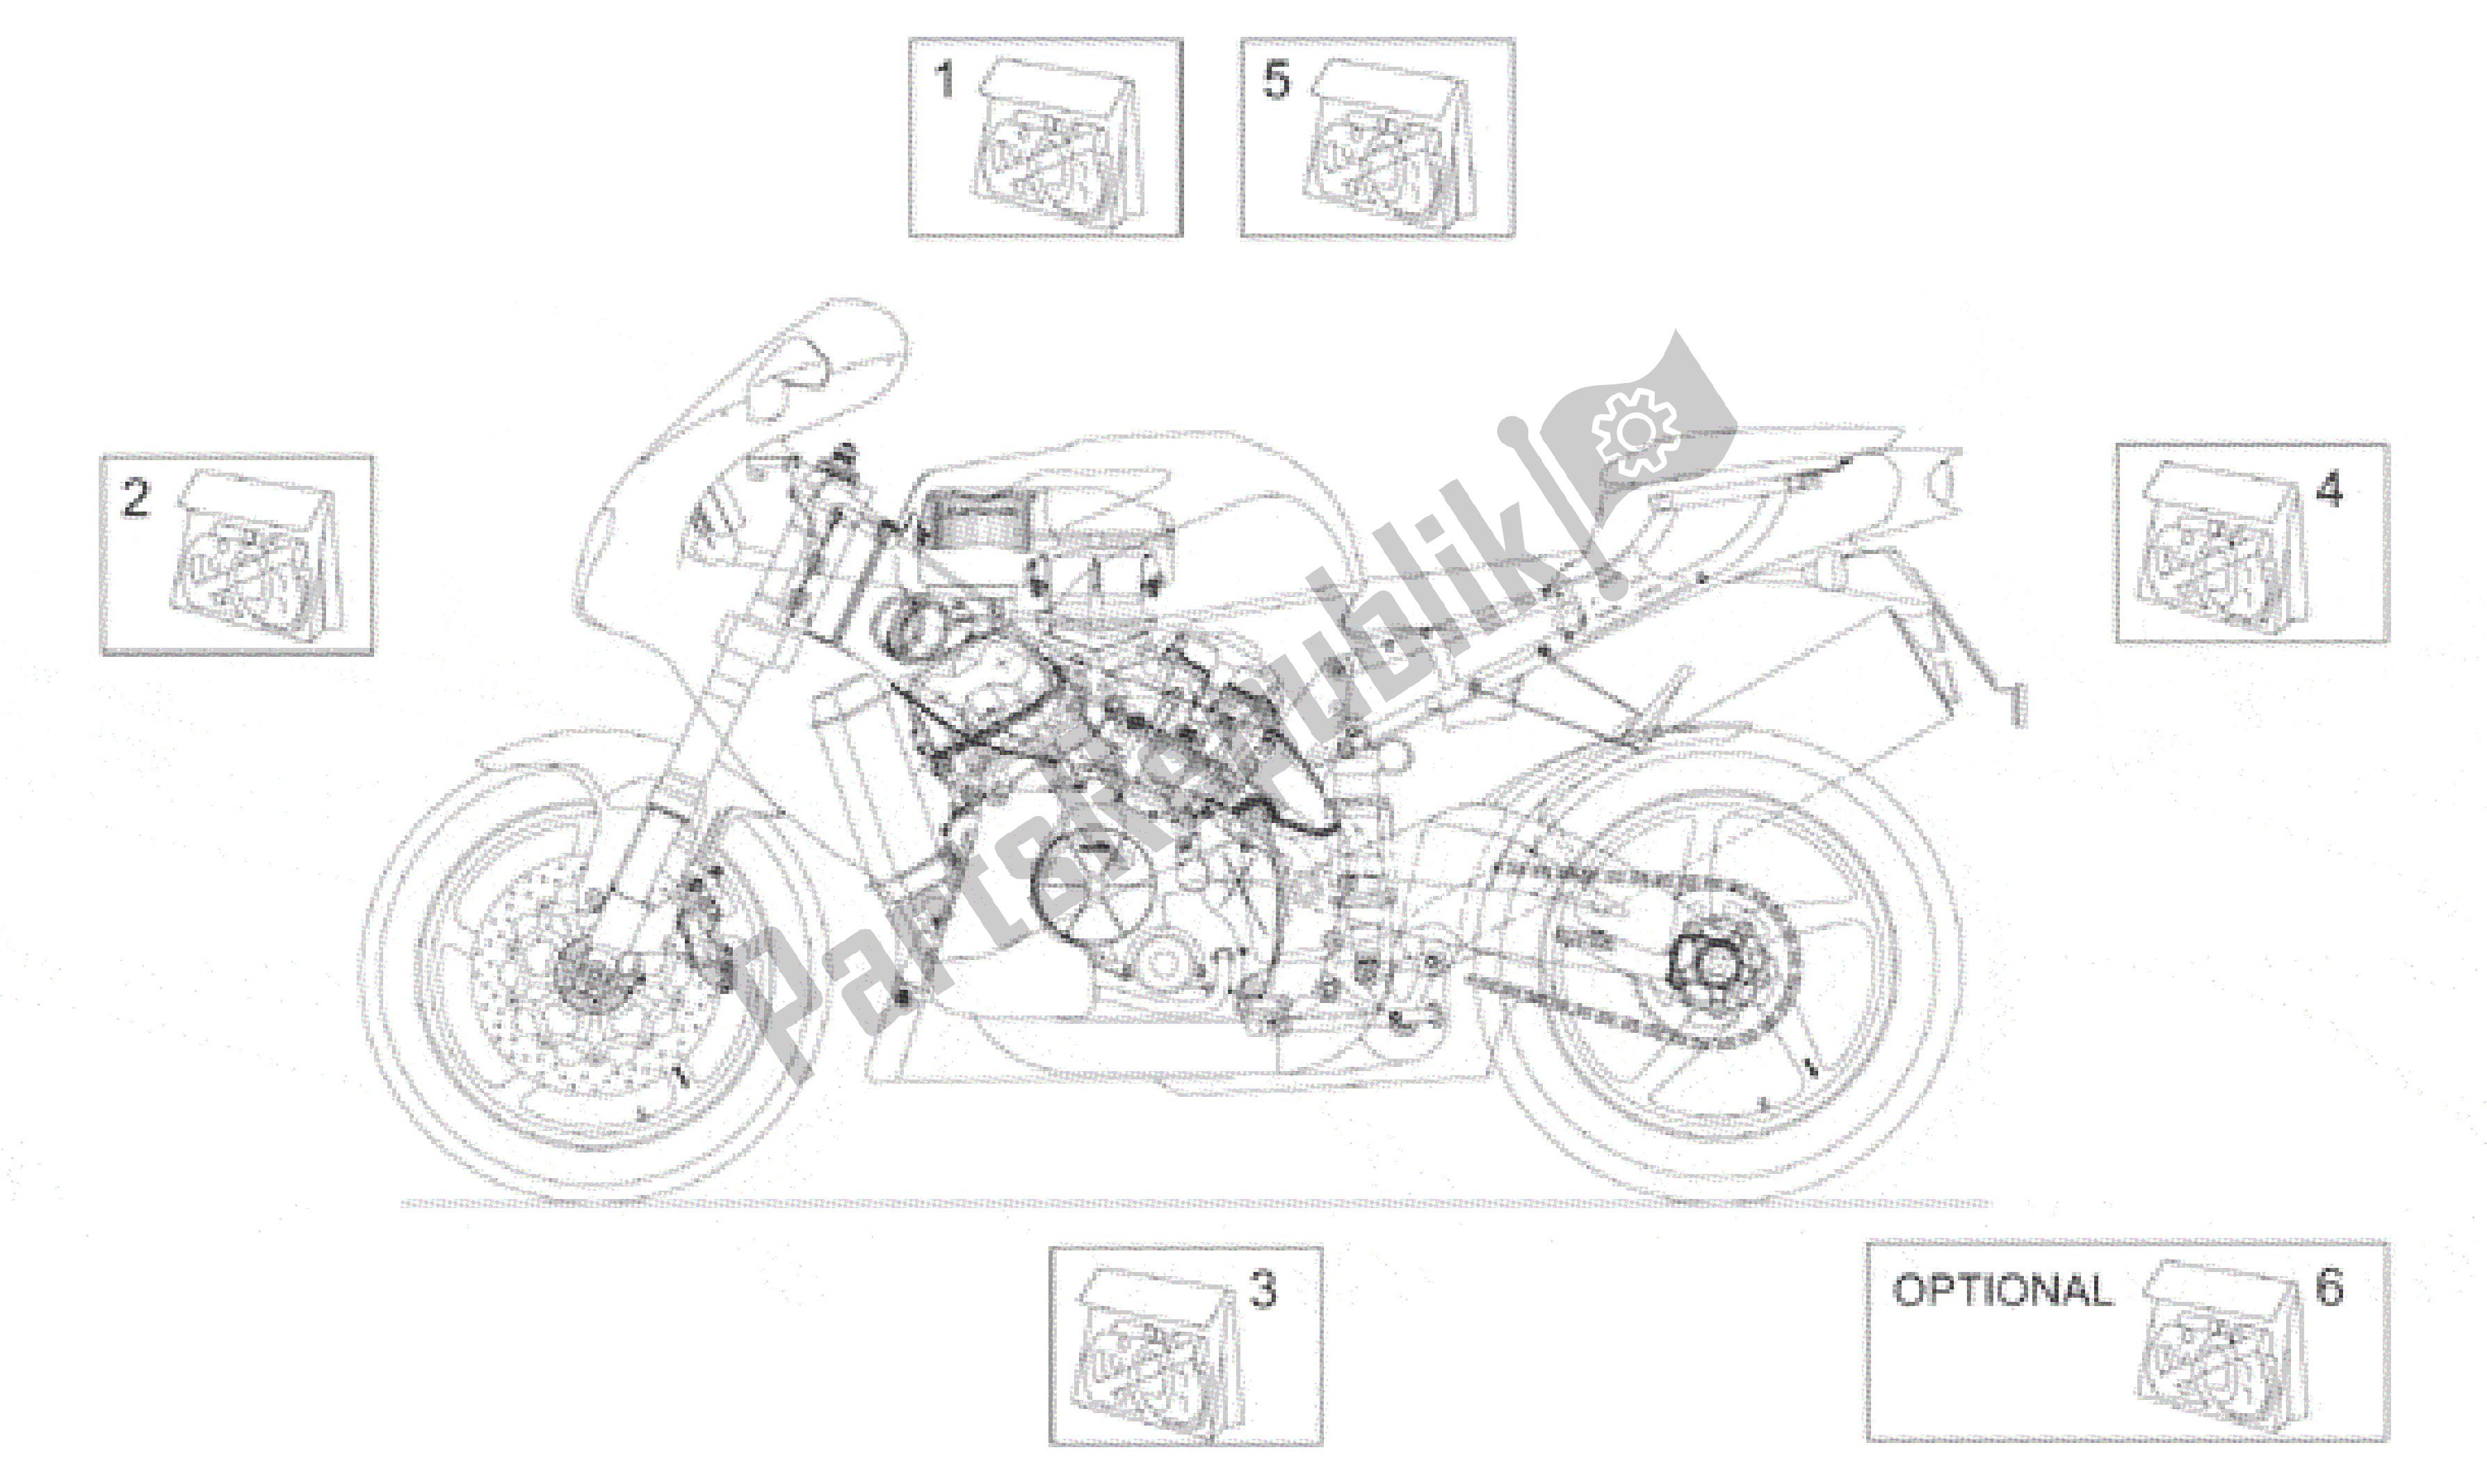 All parts for the Decal of the Aprilia RSV Mille 3901 1000 2001 - 2002